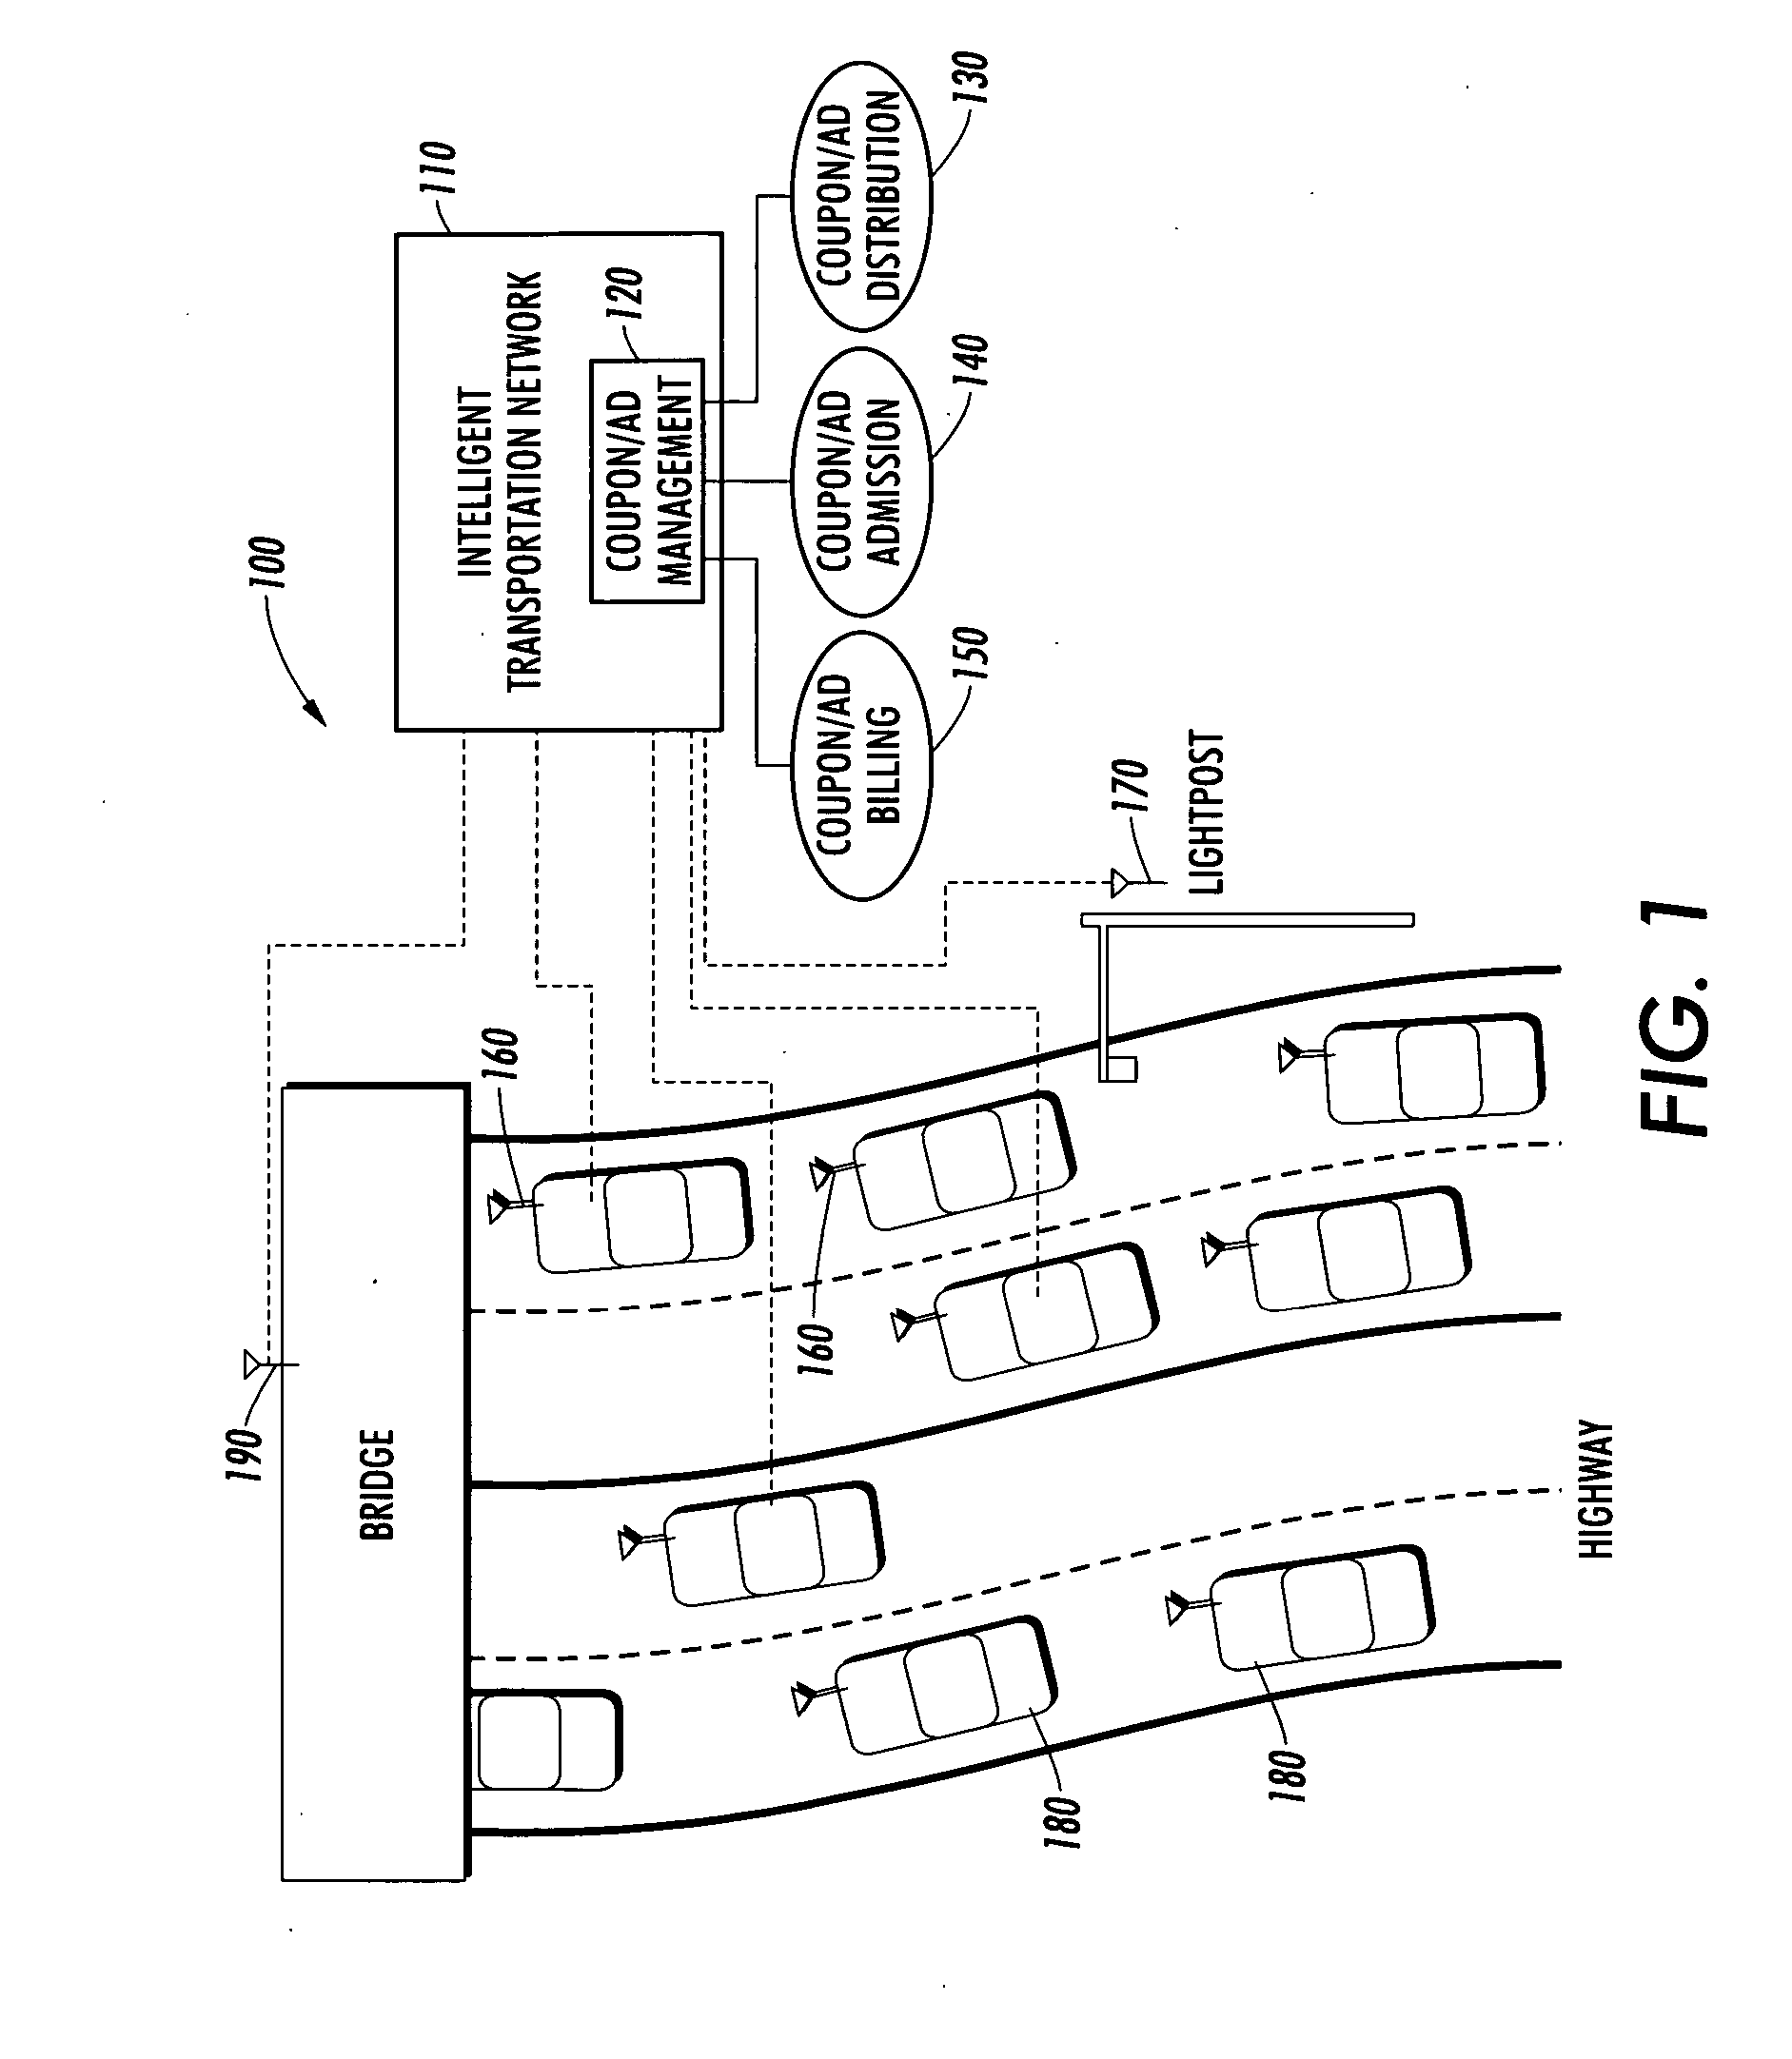 System and method to manage advertising and coupon presentation in vehicles